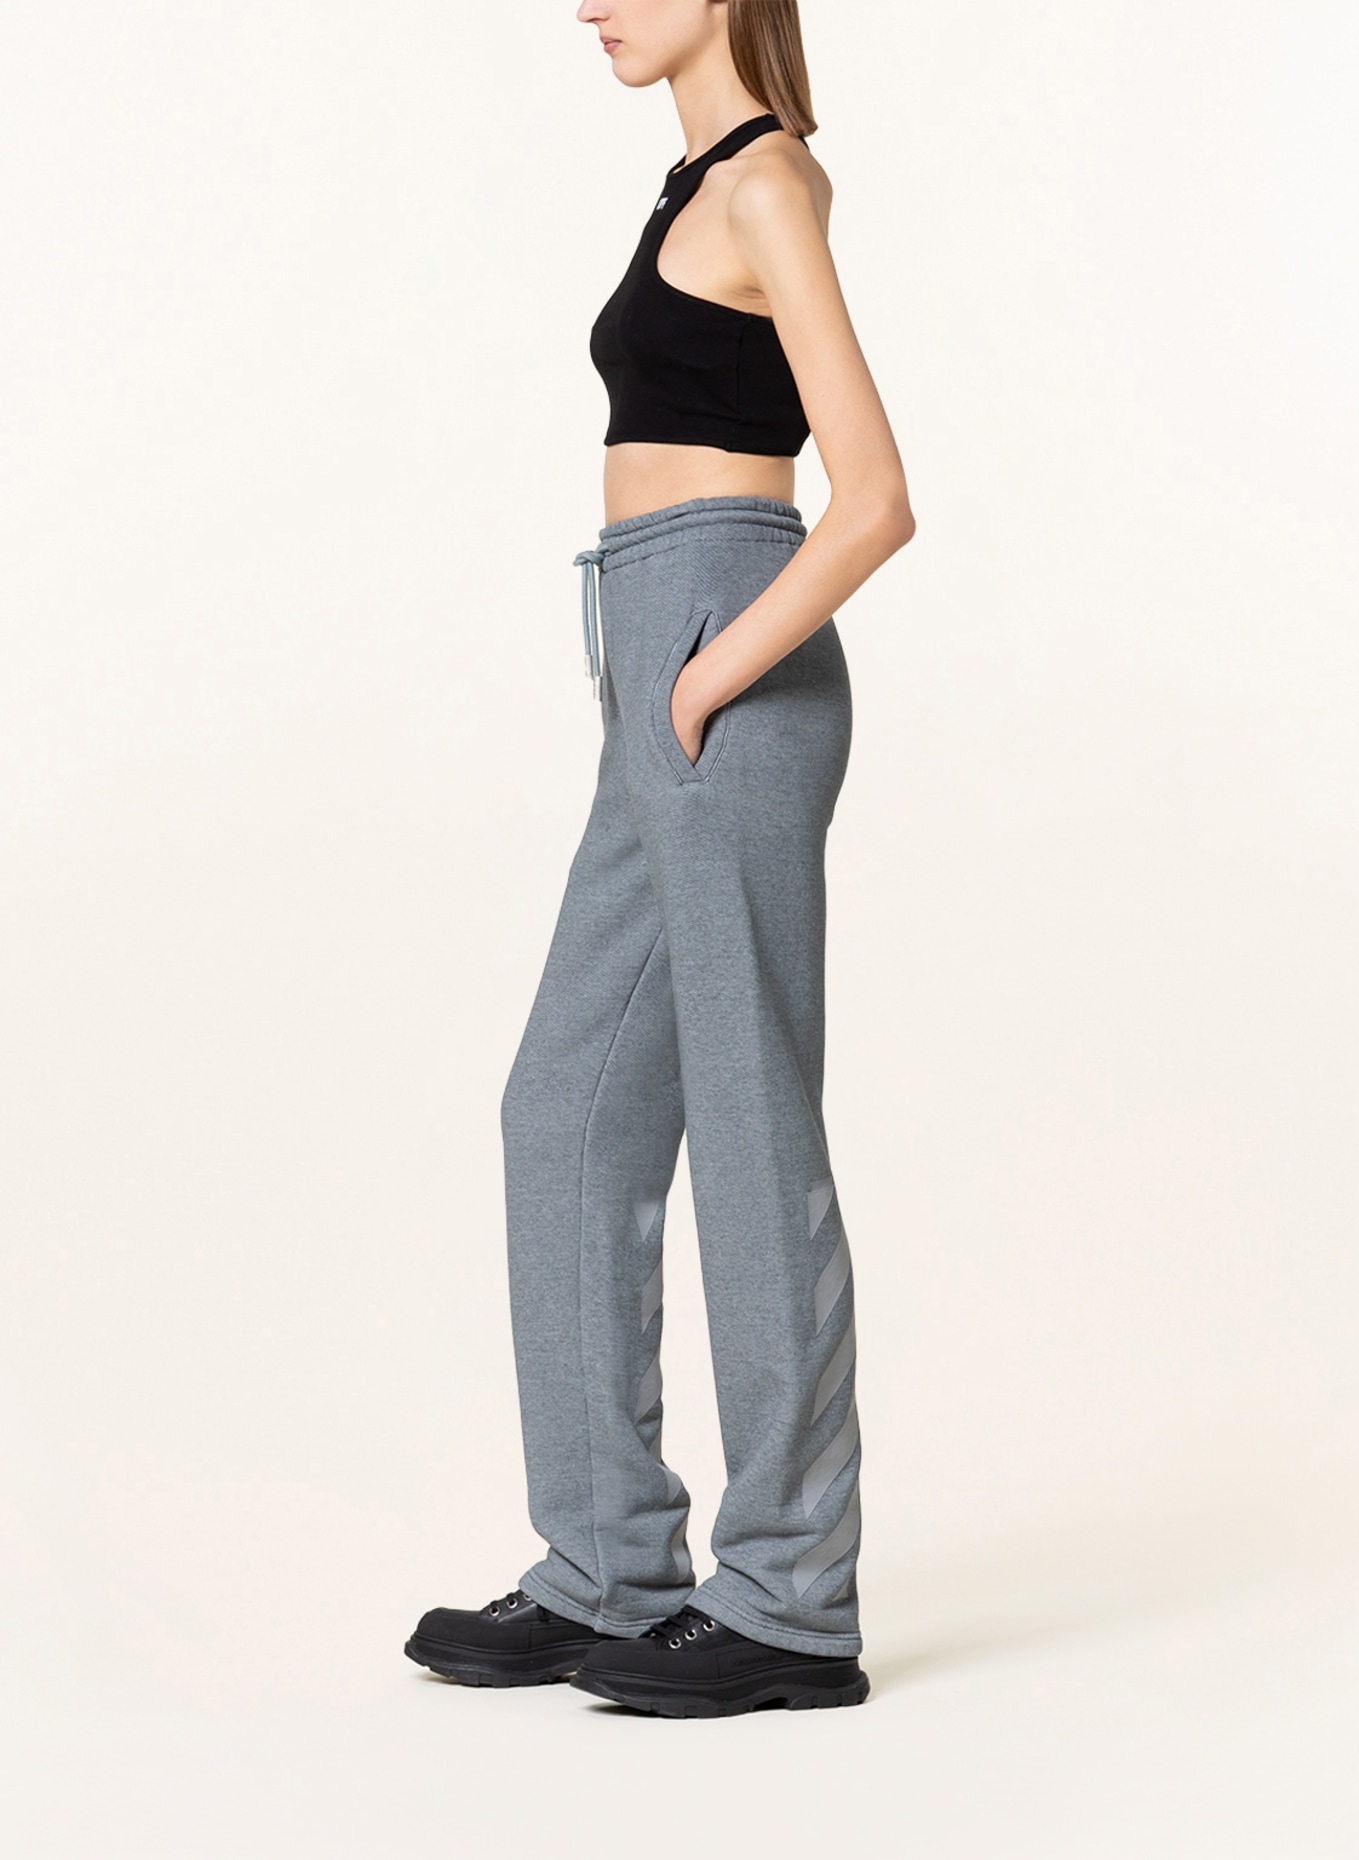 Off-White Pants in jogger style , Color: GRAY (Image 4)